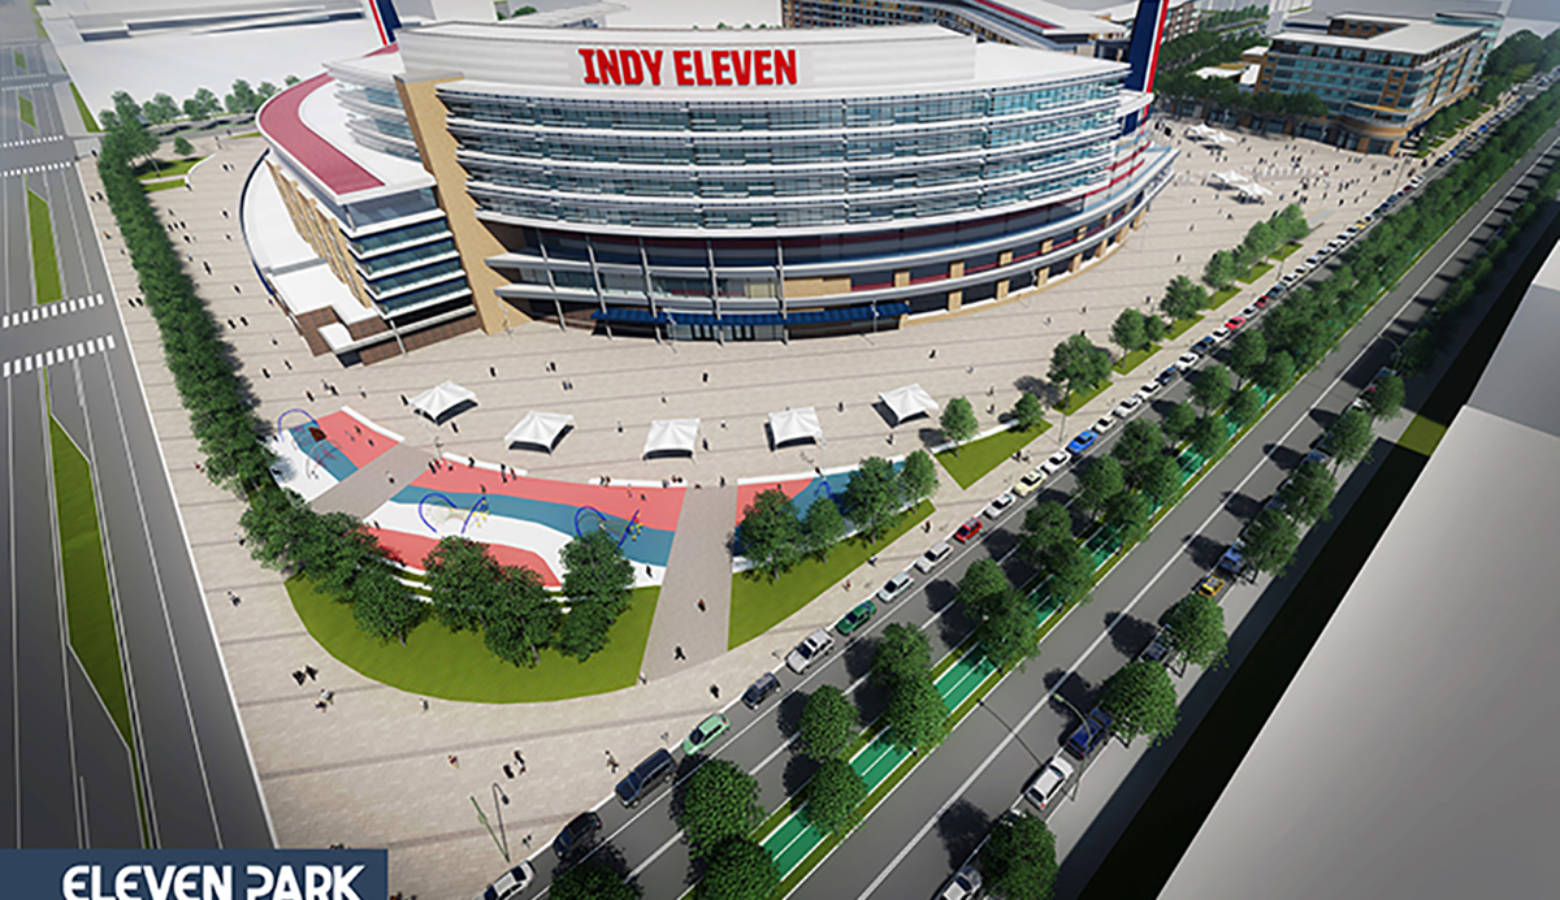 Rendering of the proposed Indy Eleven stadium. (Provided by Keystone Group)